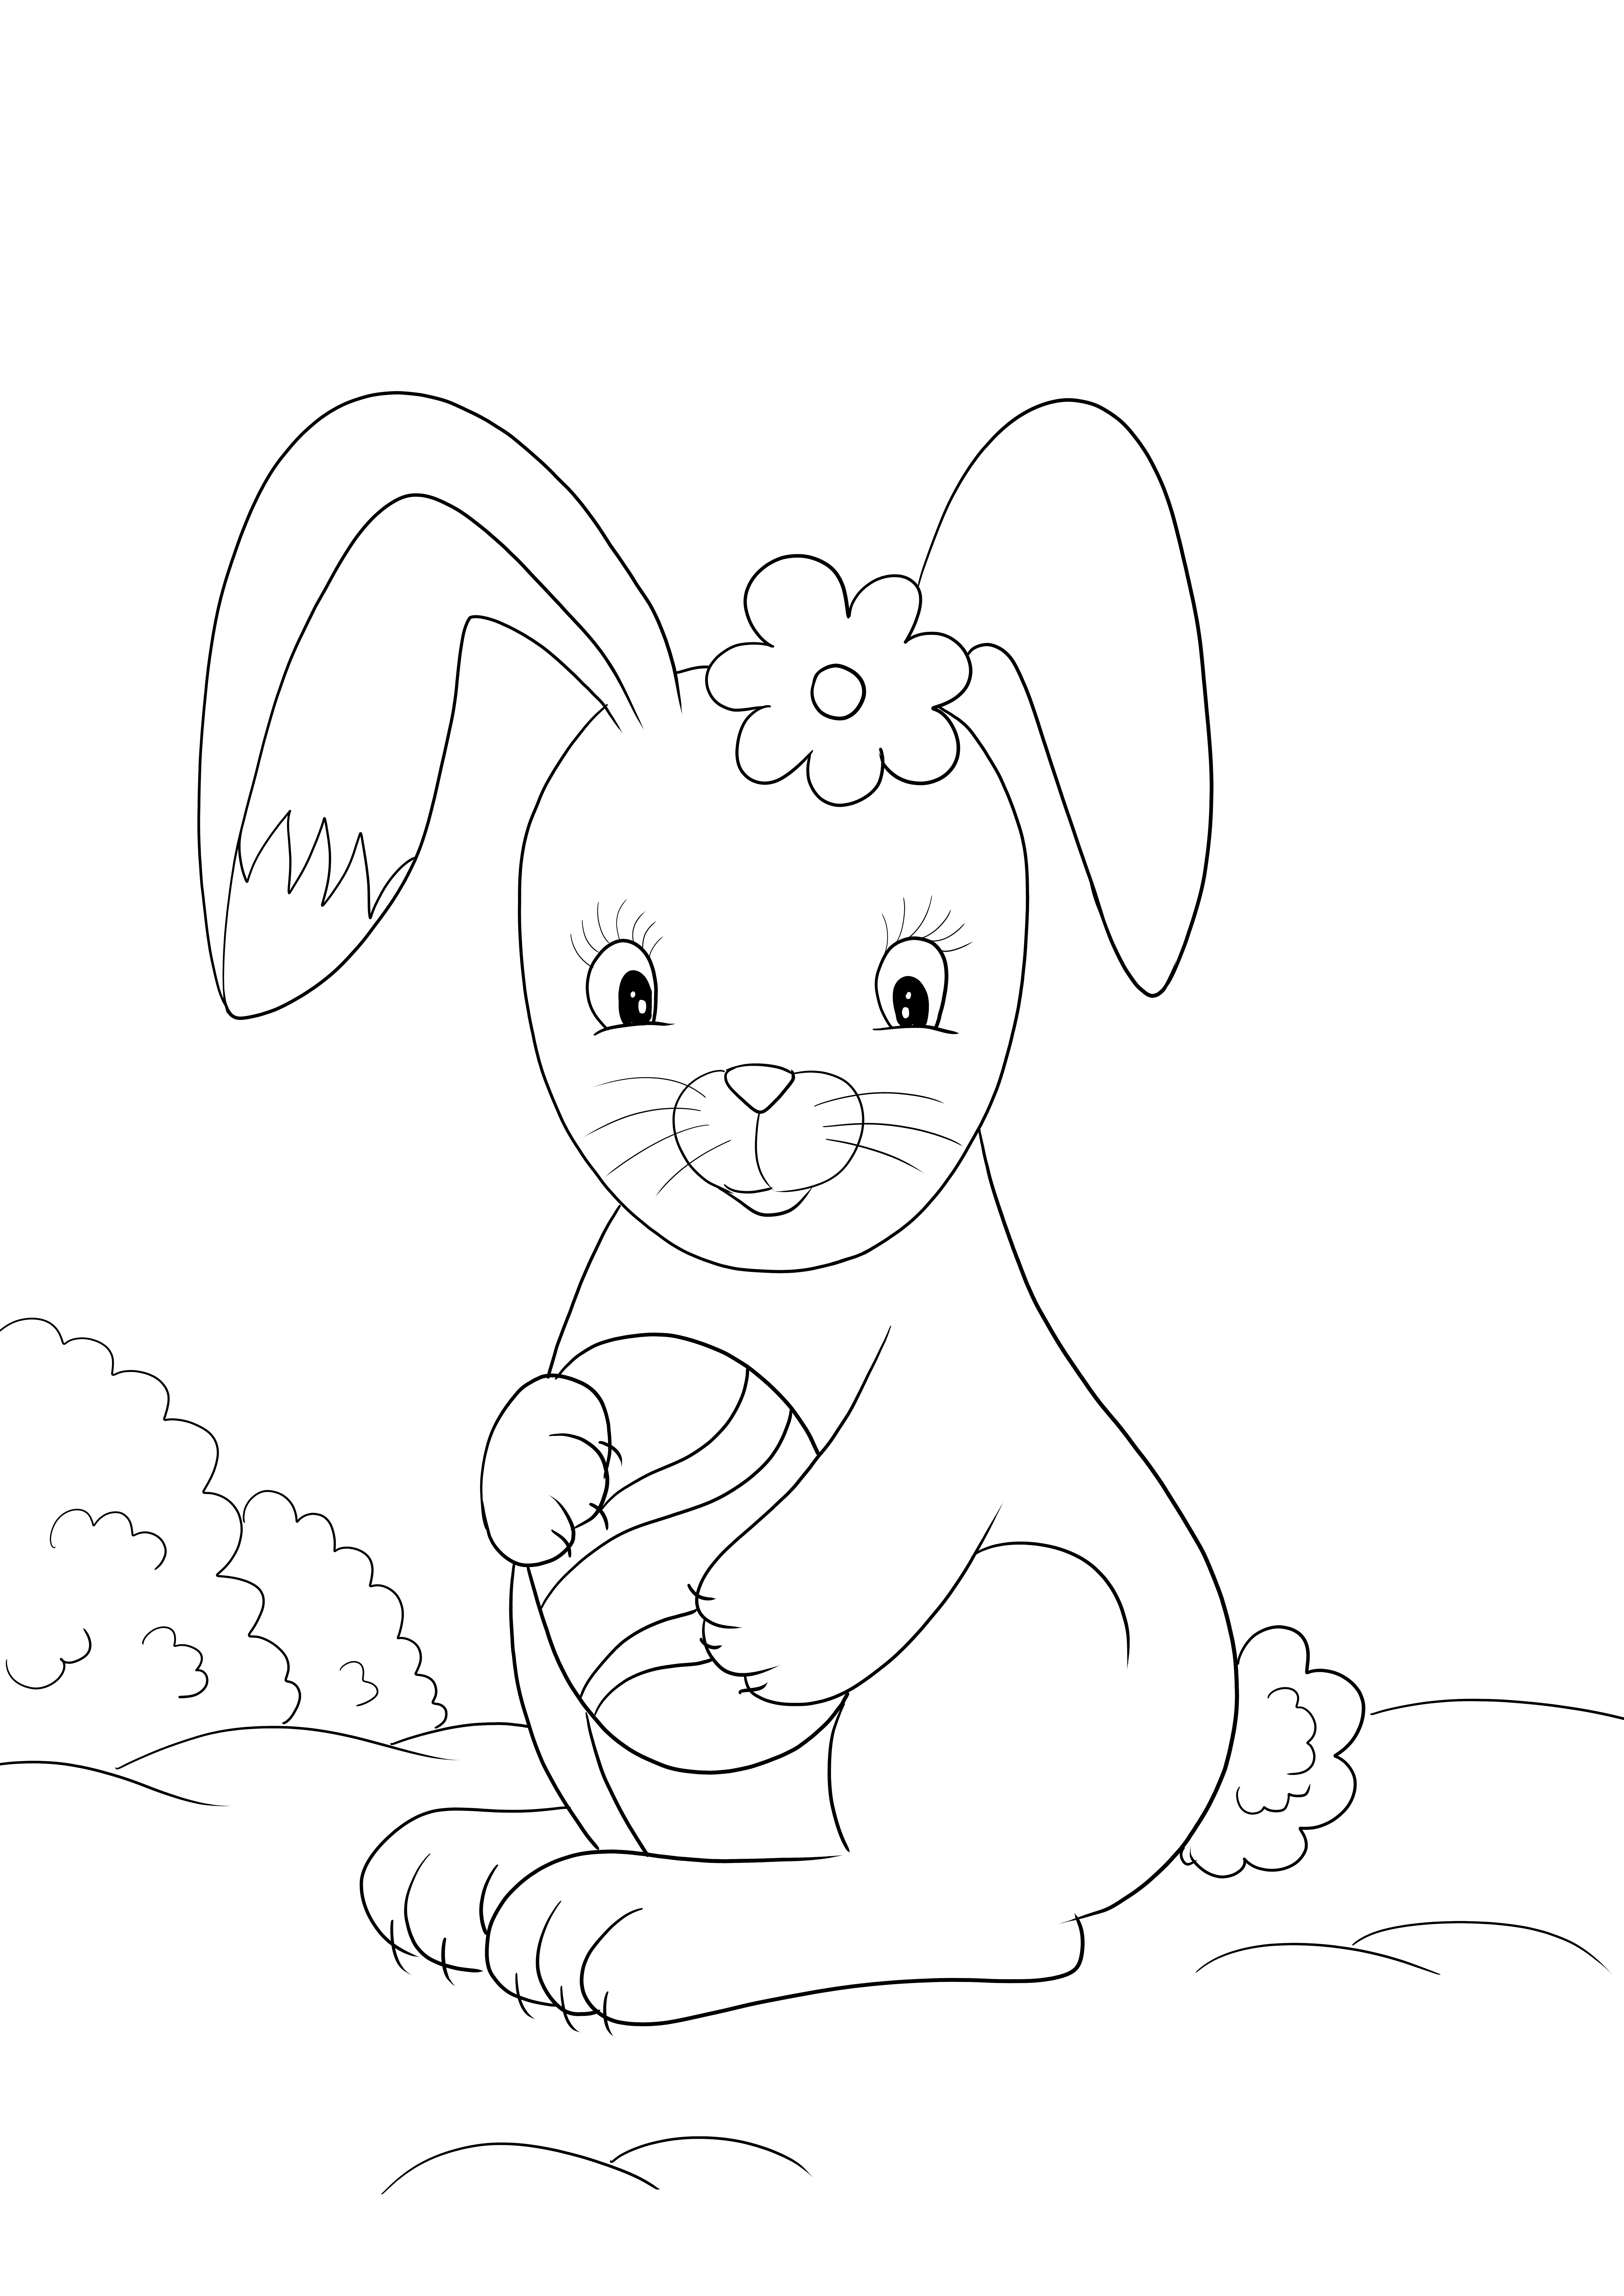 Cute Easter Bunny coloring image for free download or print